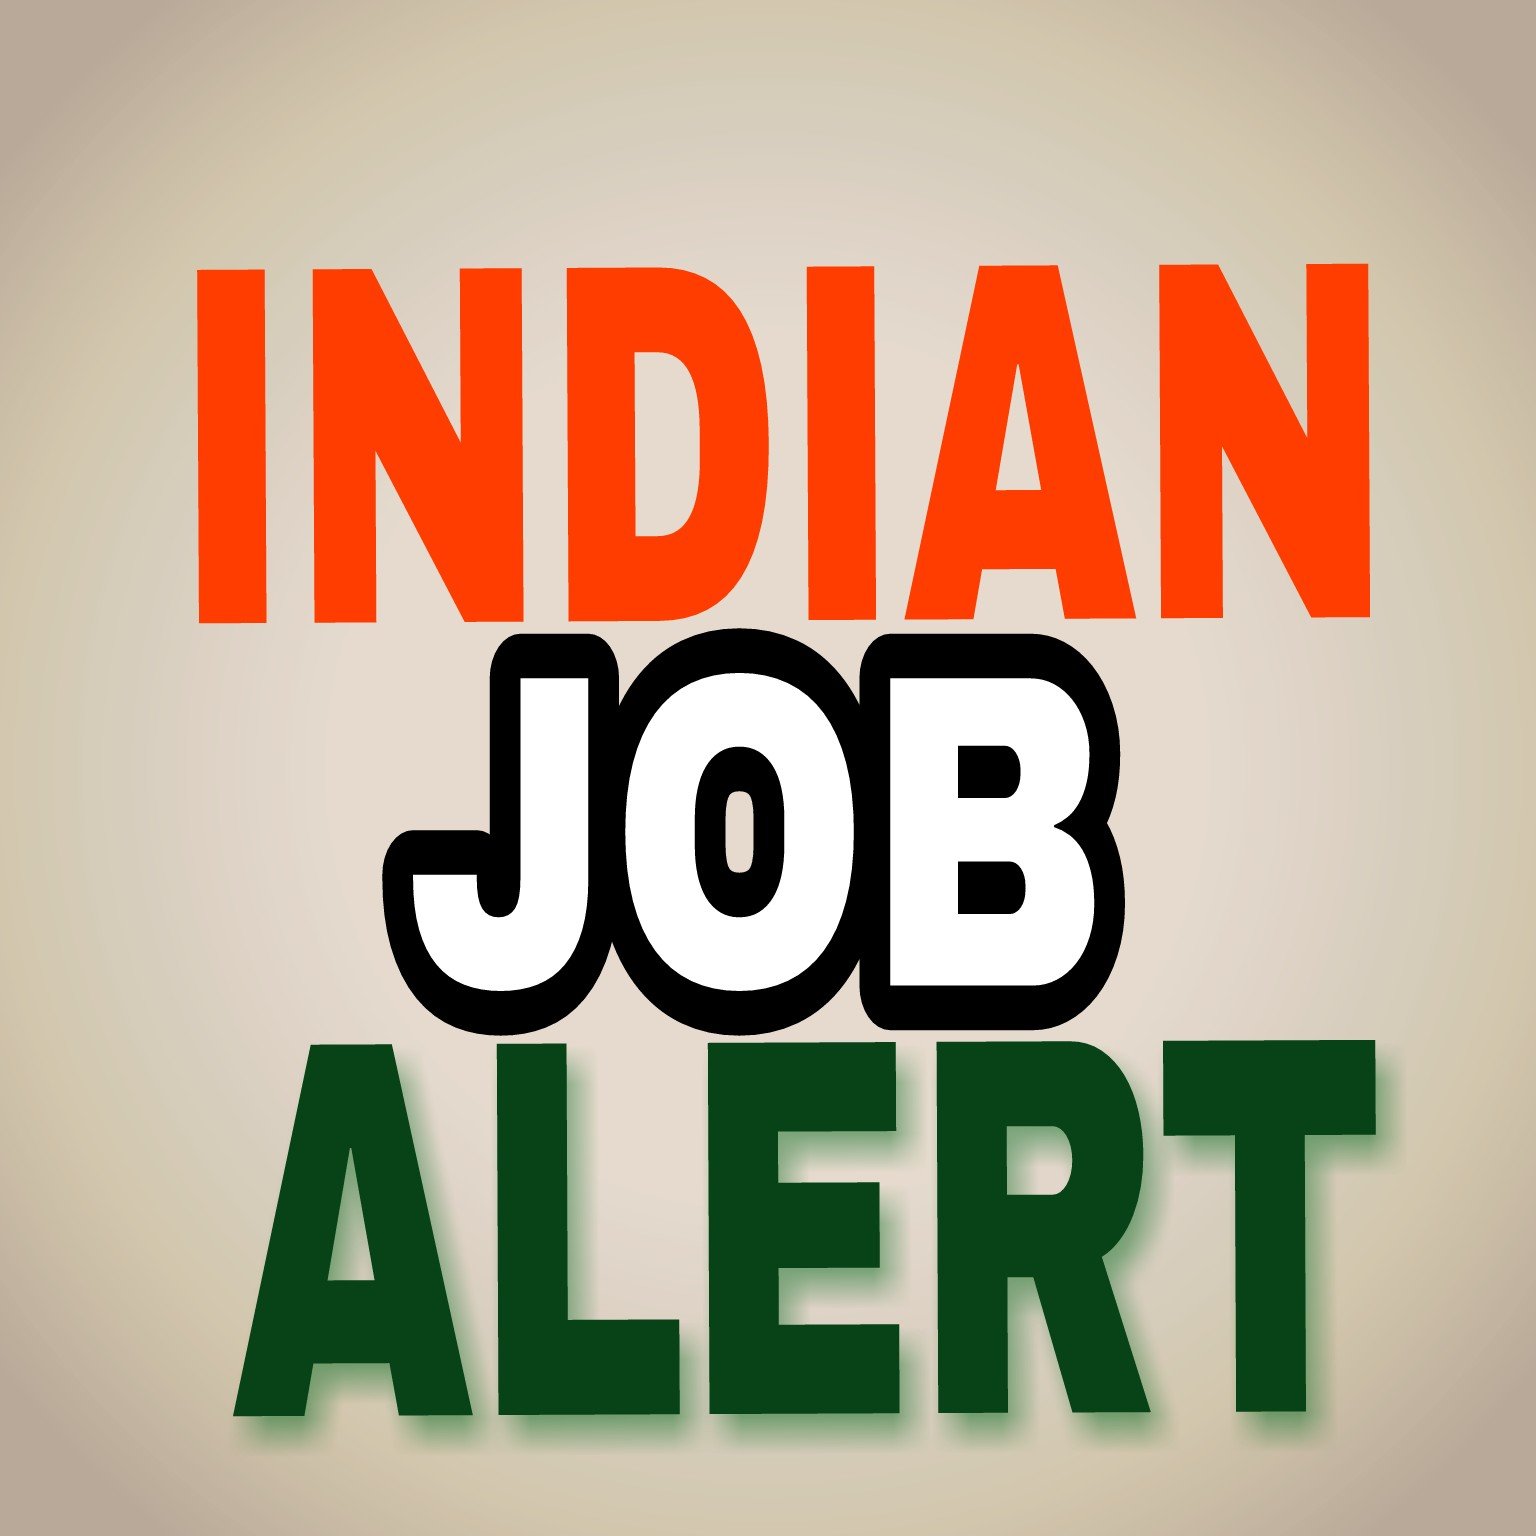 INDIAN JOB ALERT ALL LATEST JOB INFORMATION WE GIVE ALL GOVERMENT AND PRIVATE JOB RELATED INFORMATION. MORE INFORMATION. SUBSCRIBE NOW MY YOUTUBE CHANNEL .